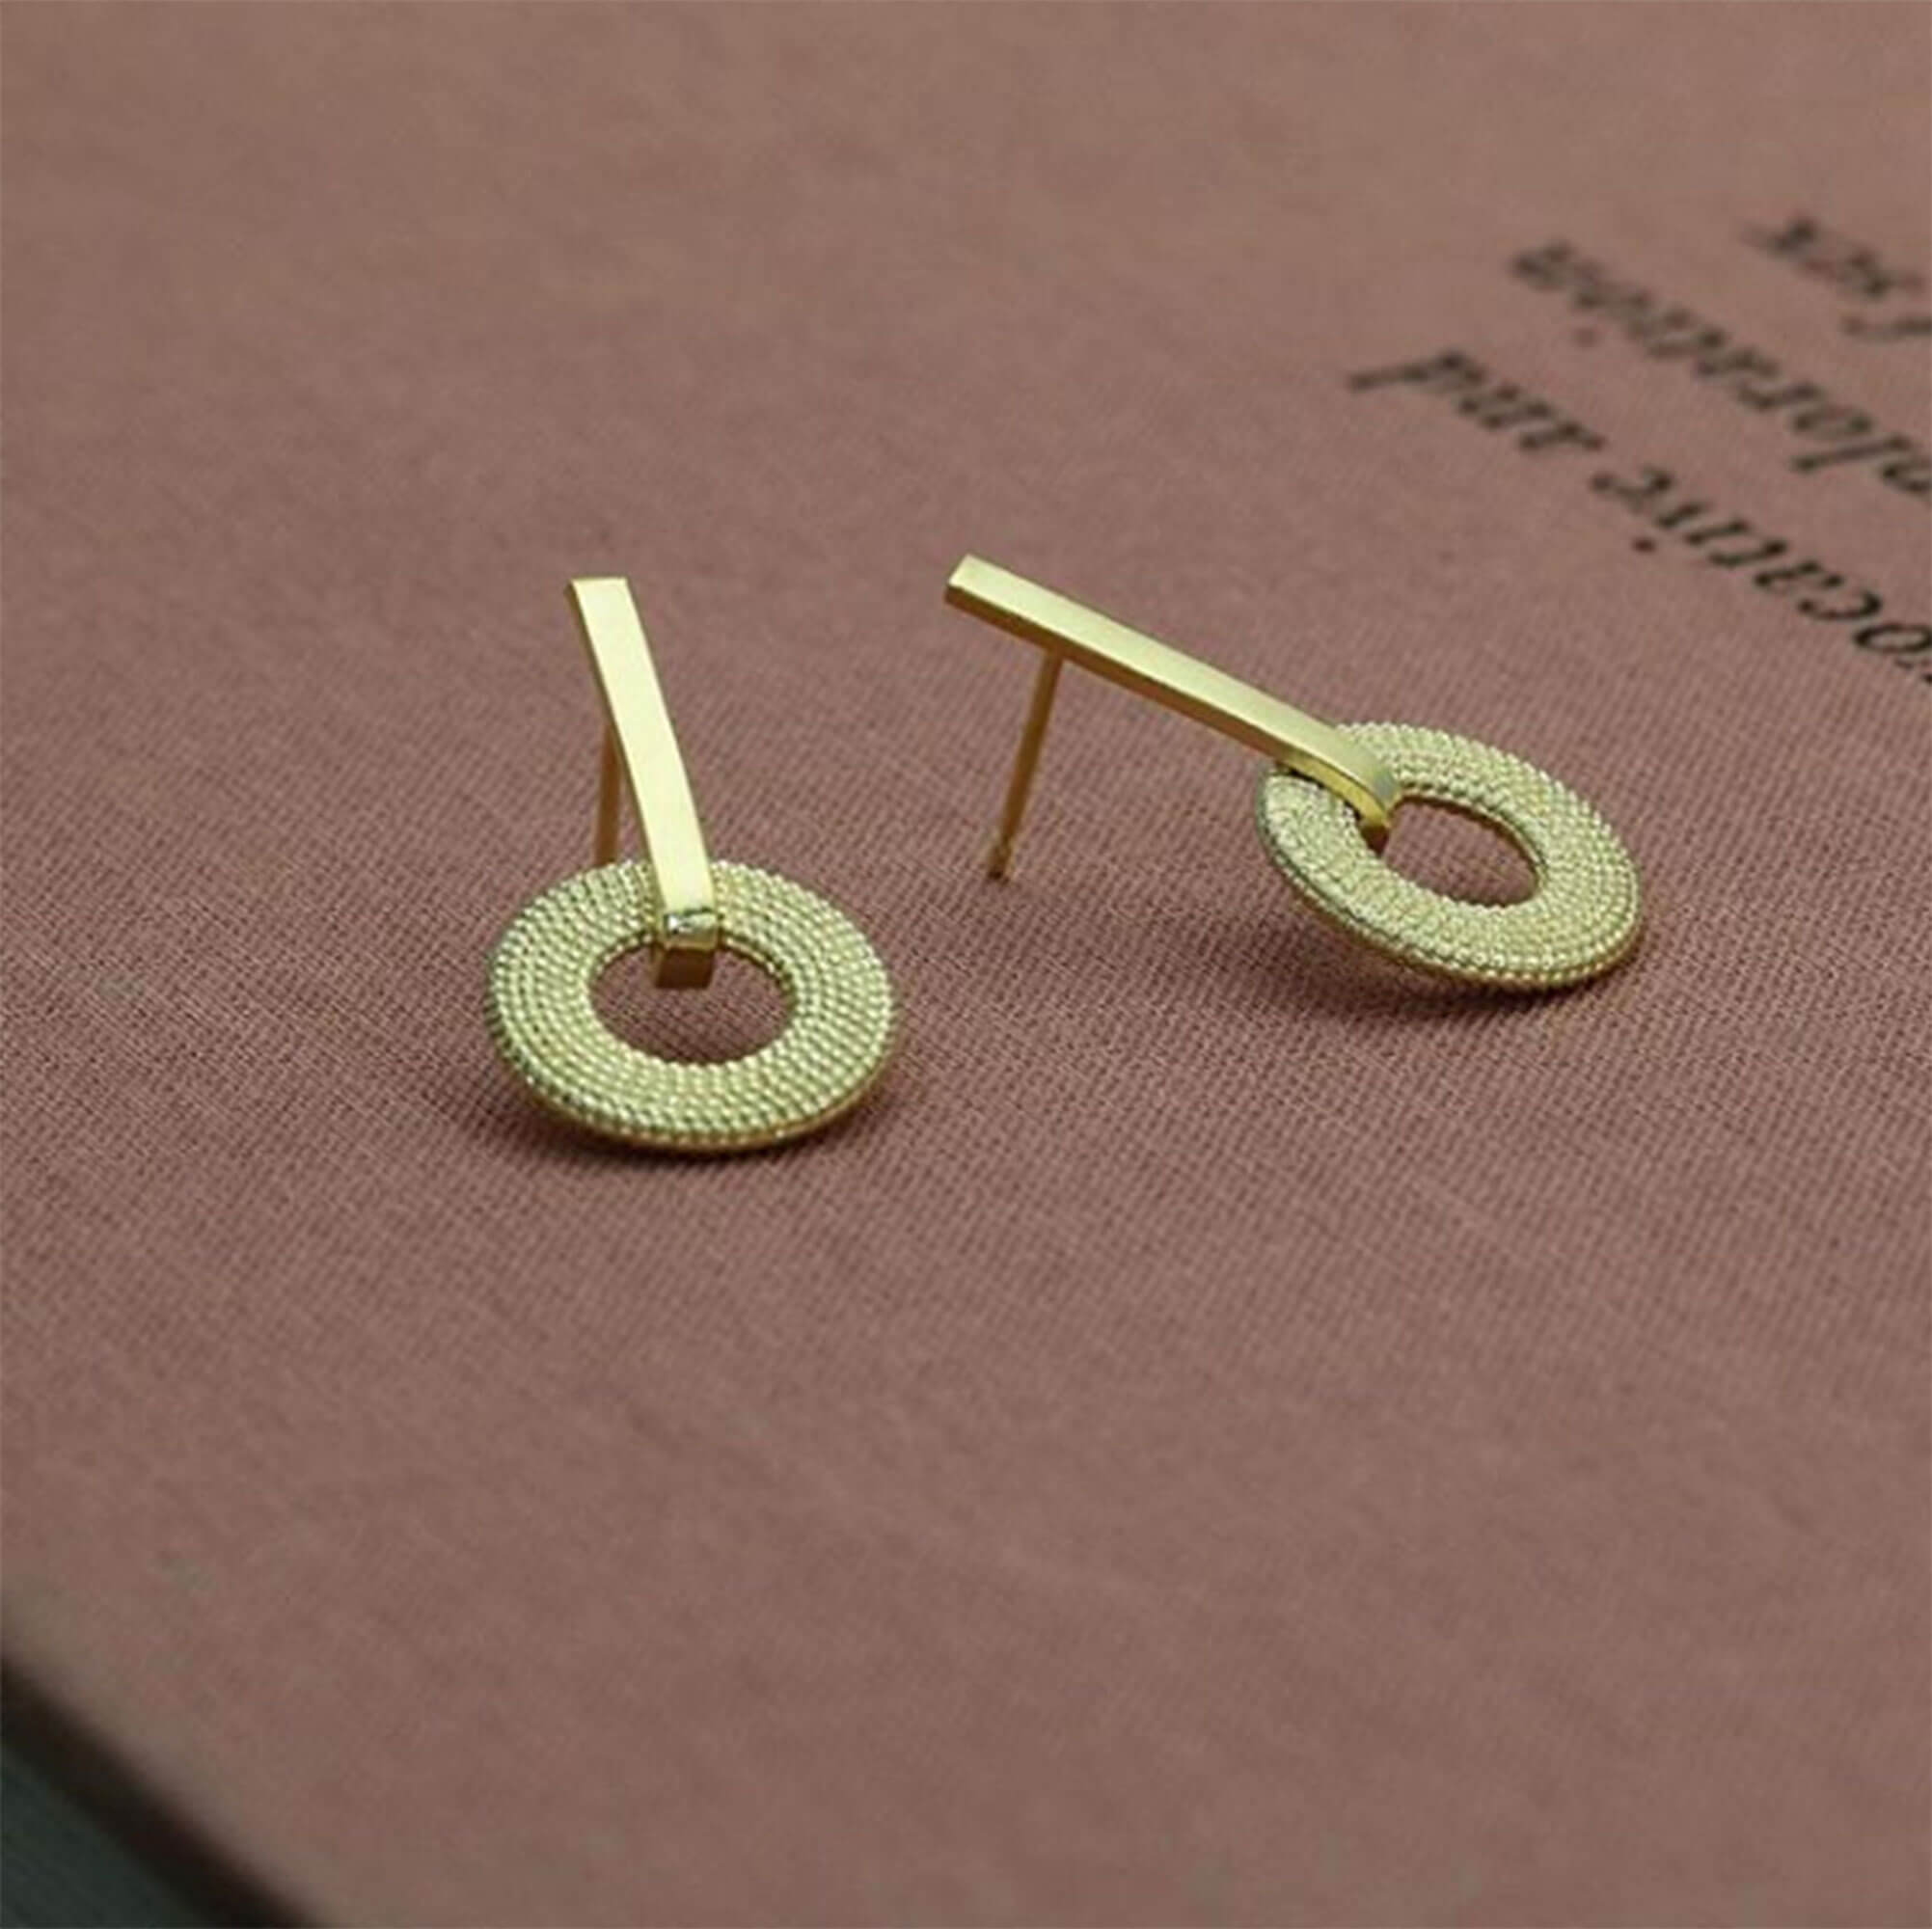 A pair of Weol Yellow Gold Drop Earrings on pink fabric